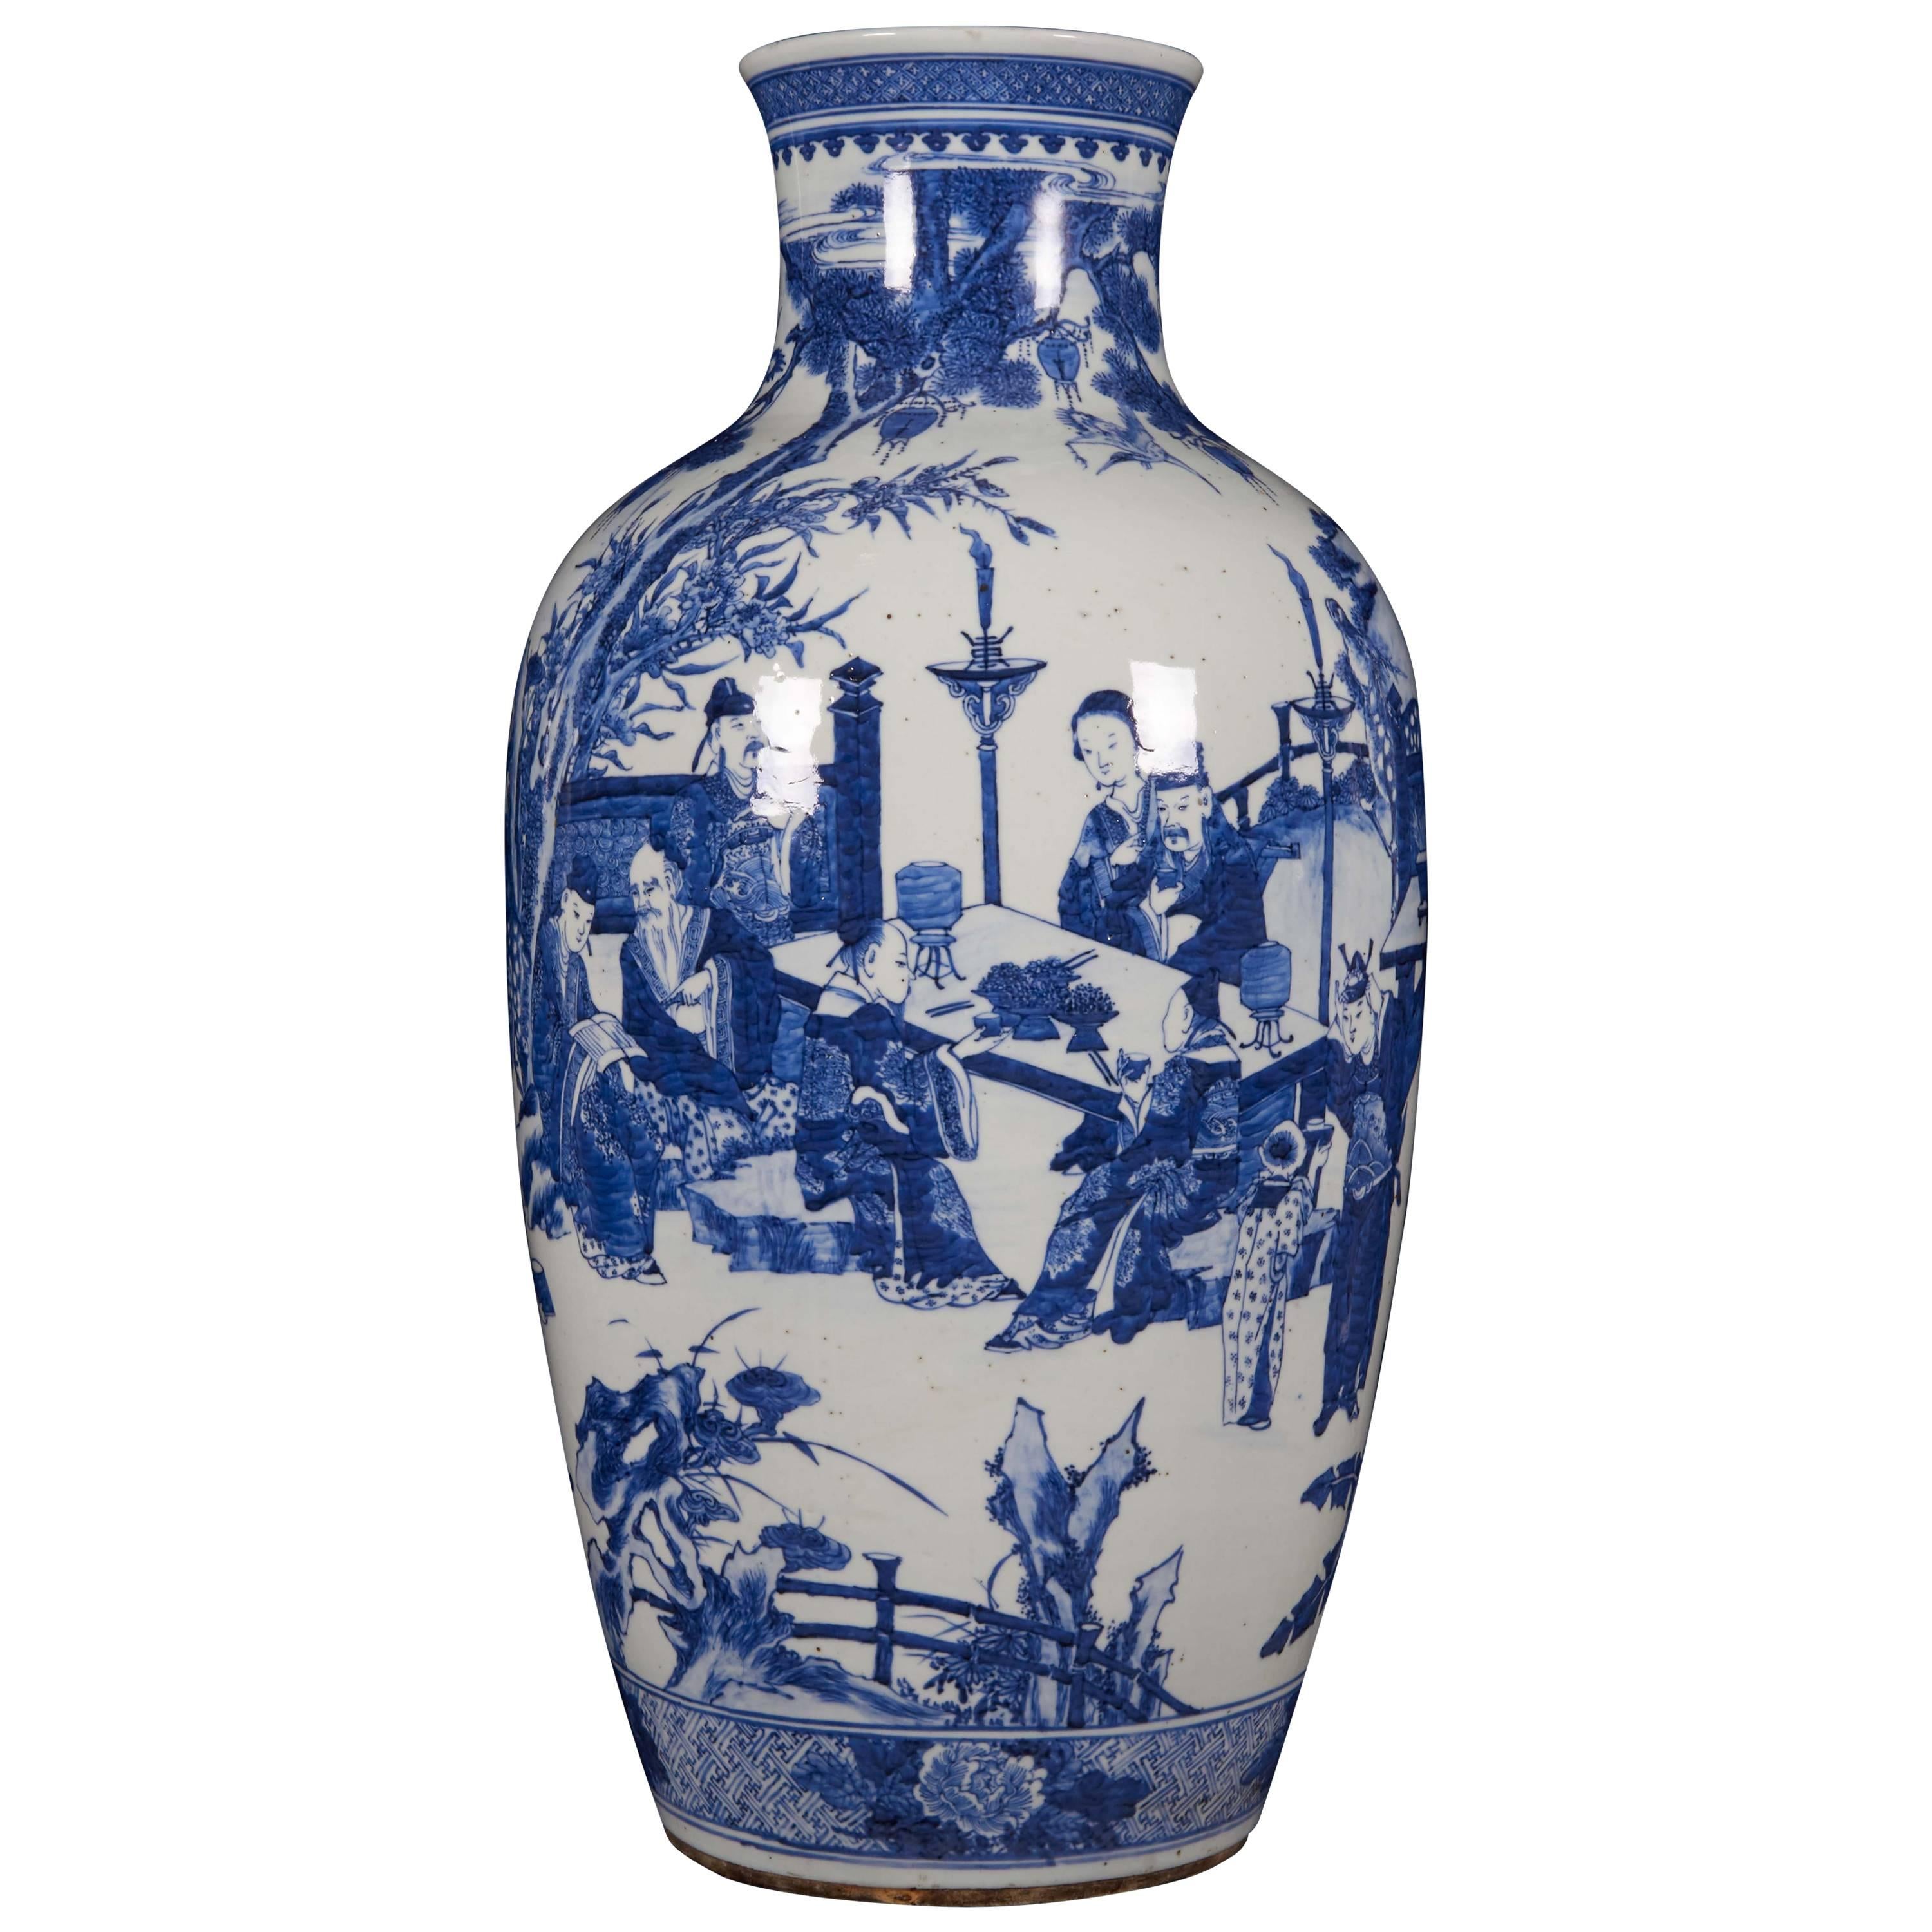 Large Chinese Porcelain Figural Blue and White Vase, 19th Century